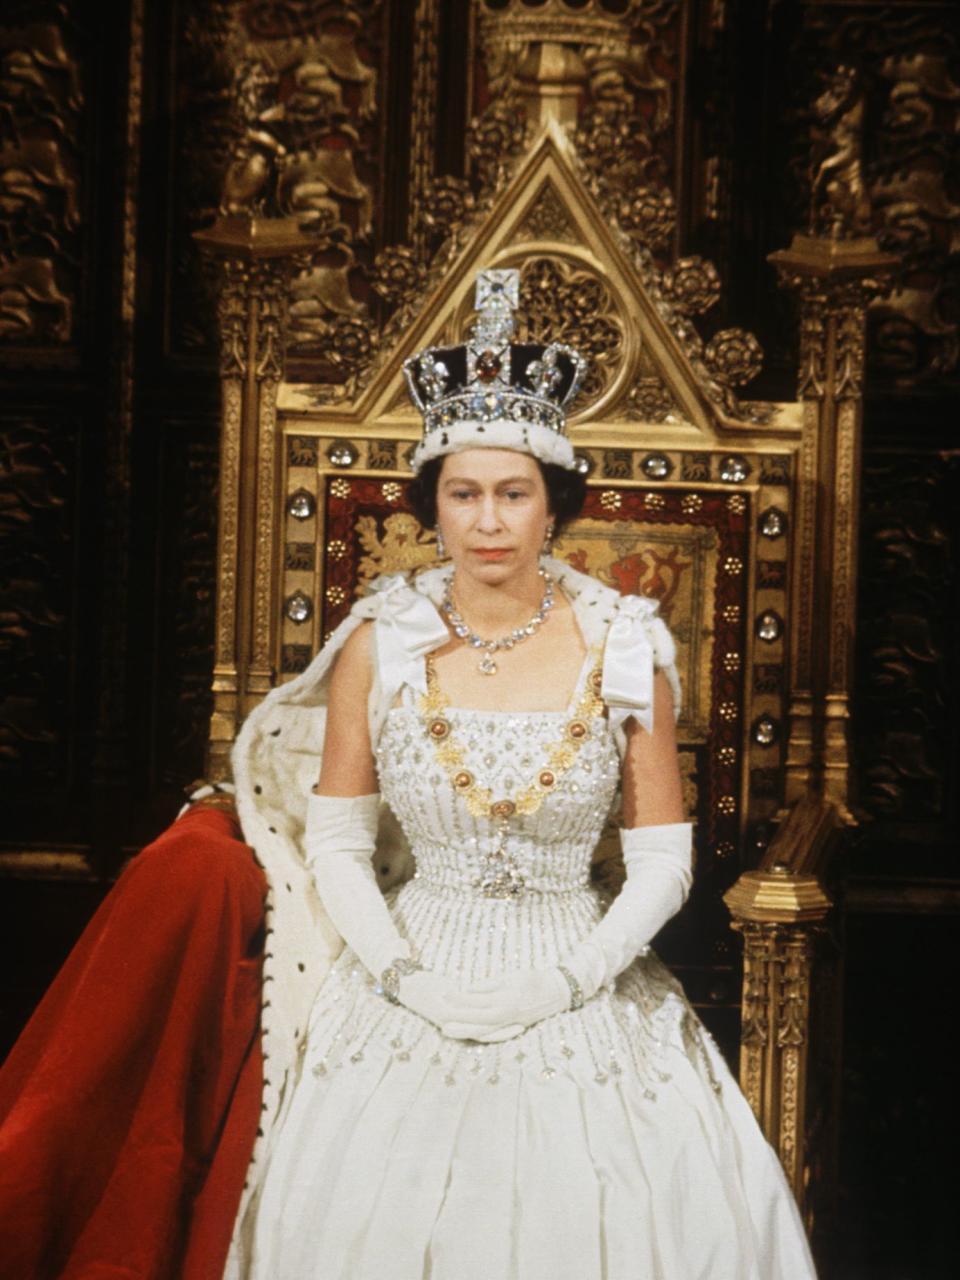 1967: The queen during the 1967 State Opening of Parliament.